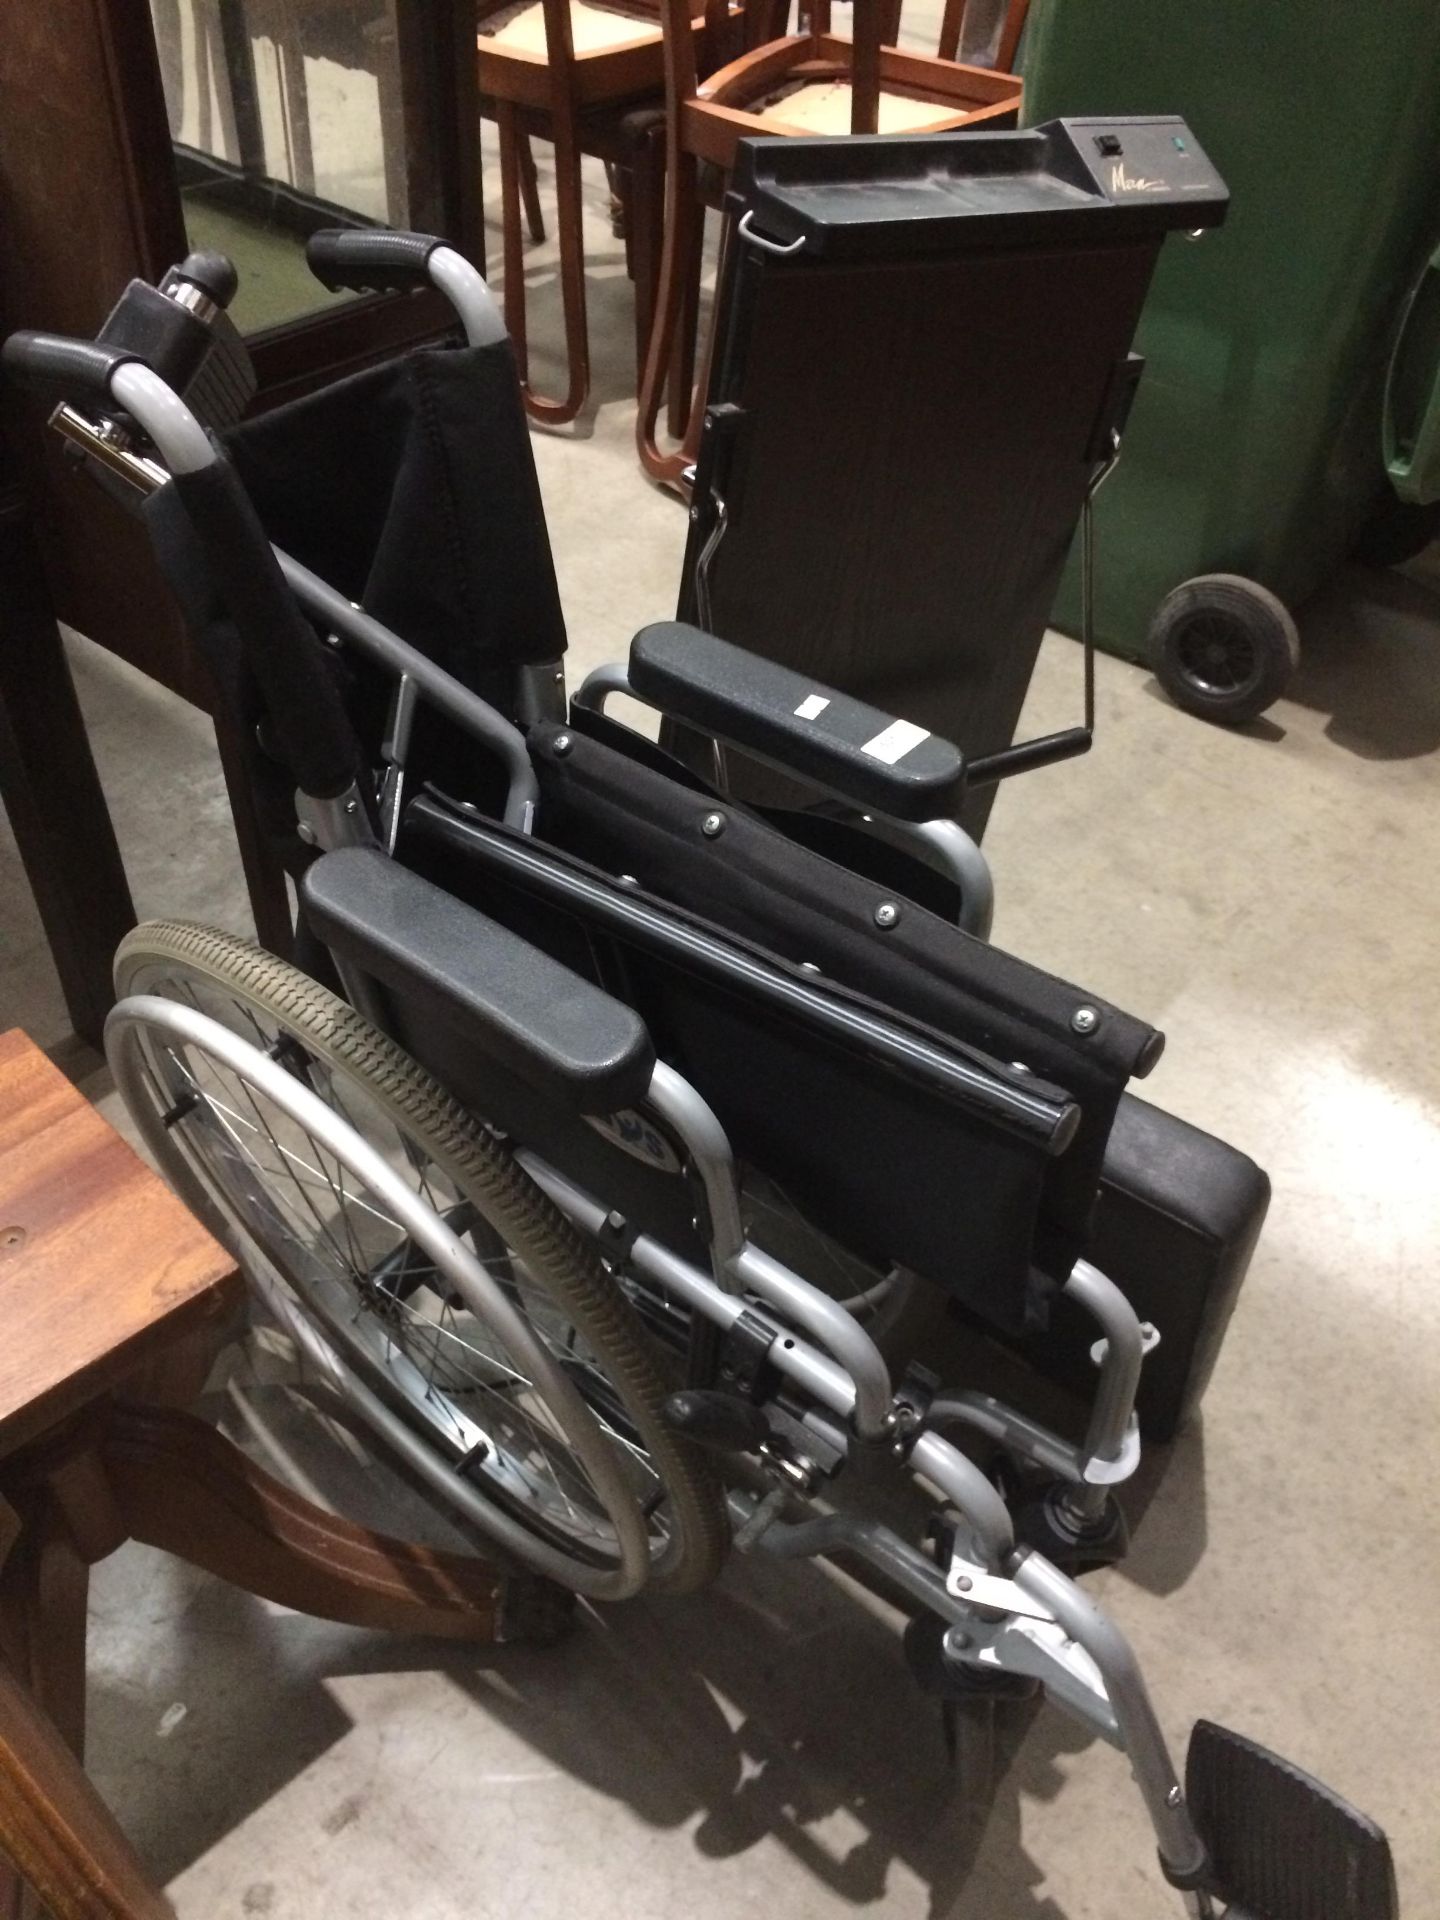 A folding wheelchair with foot rests and a Man by Carmen trouser press - 240v - plug cut off not